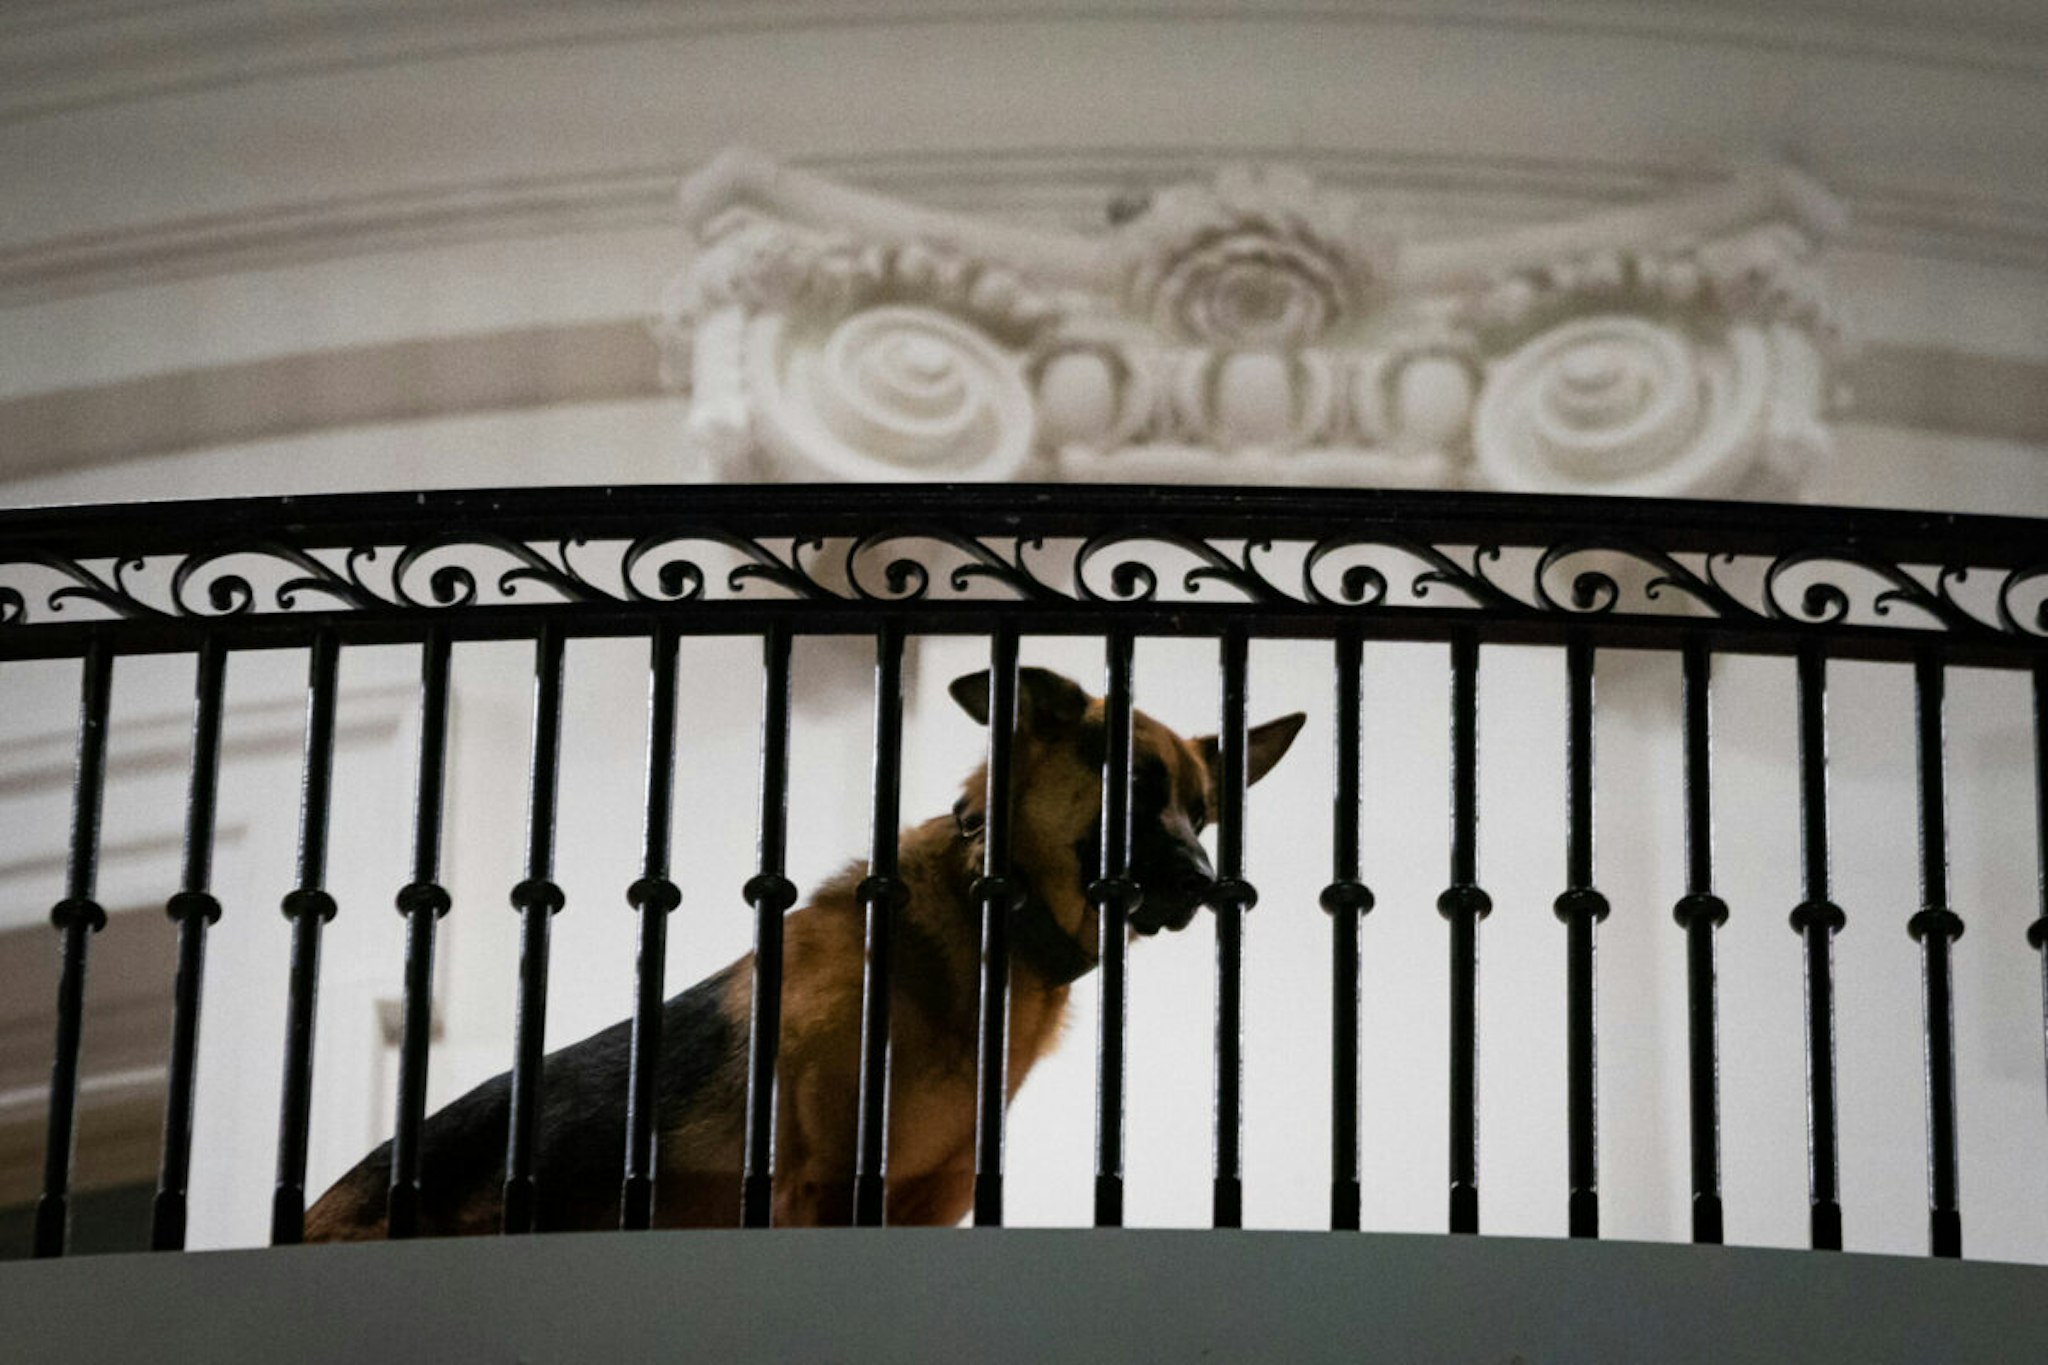 US President Joe Biden's dog Commander is seen on a balcony after Biden returned from Japan at the White House in Washington, DC, on May 21, 2023.